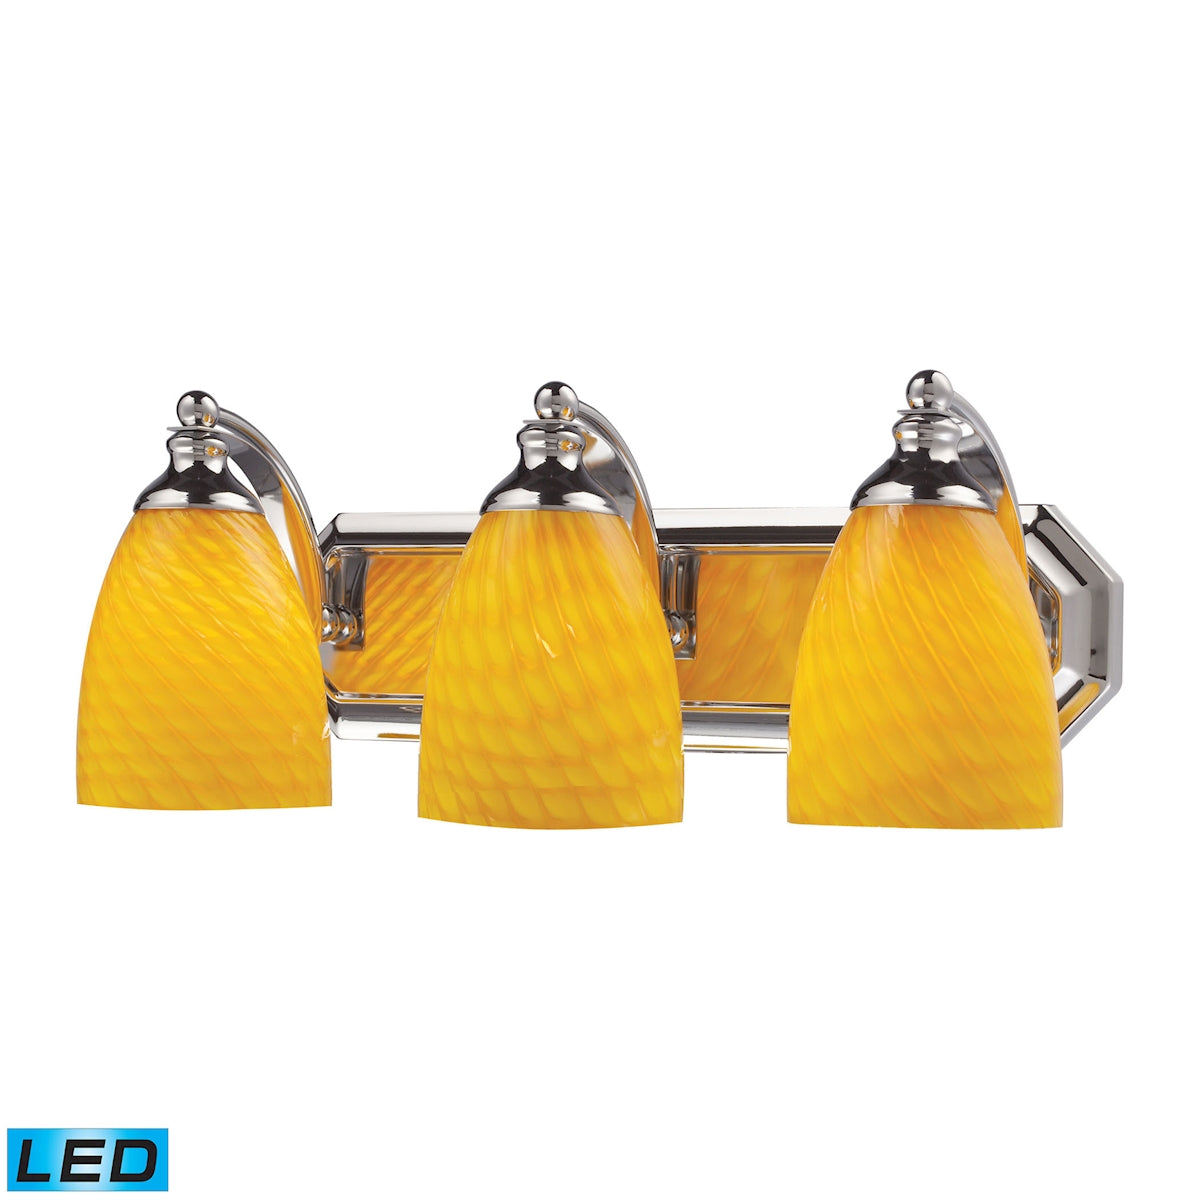 ELK Lighting 570-3C-CN-LED Mix and Match Vanity 3-Light Wall Lamp in Chrome with Canary Glass - Includes LED Bulbs